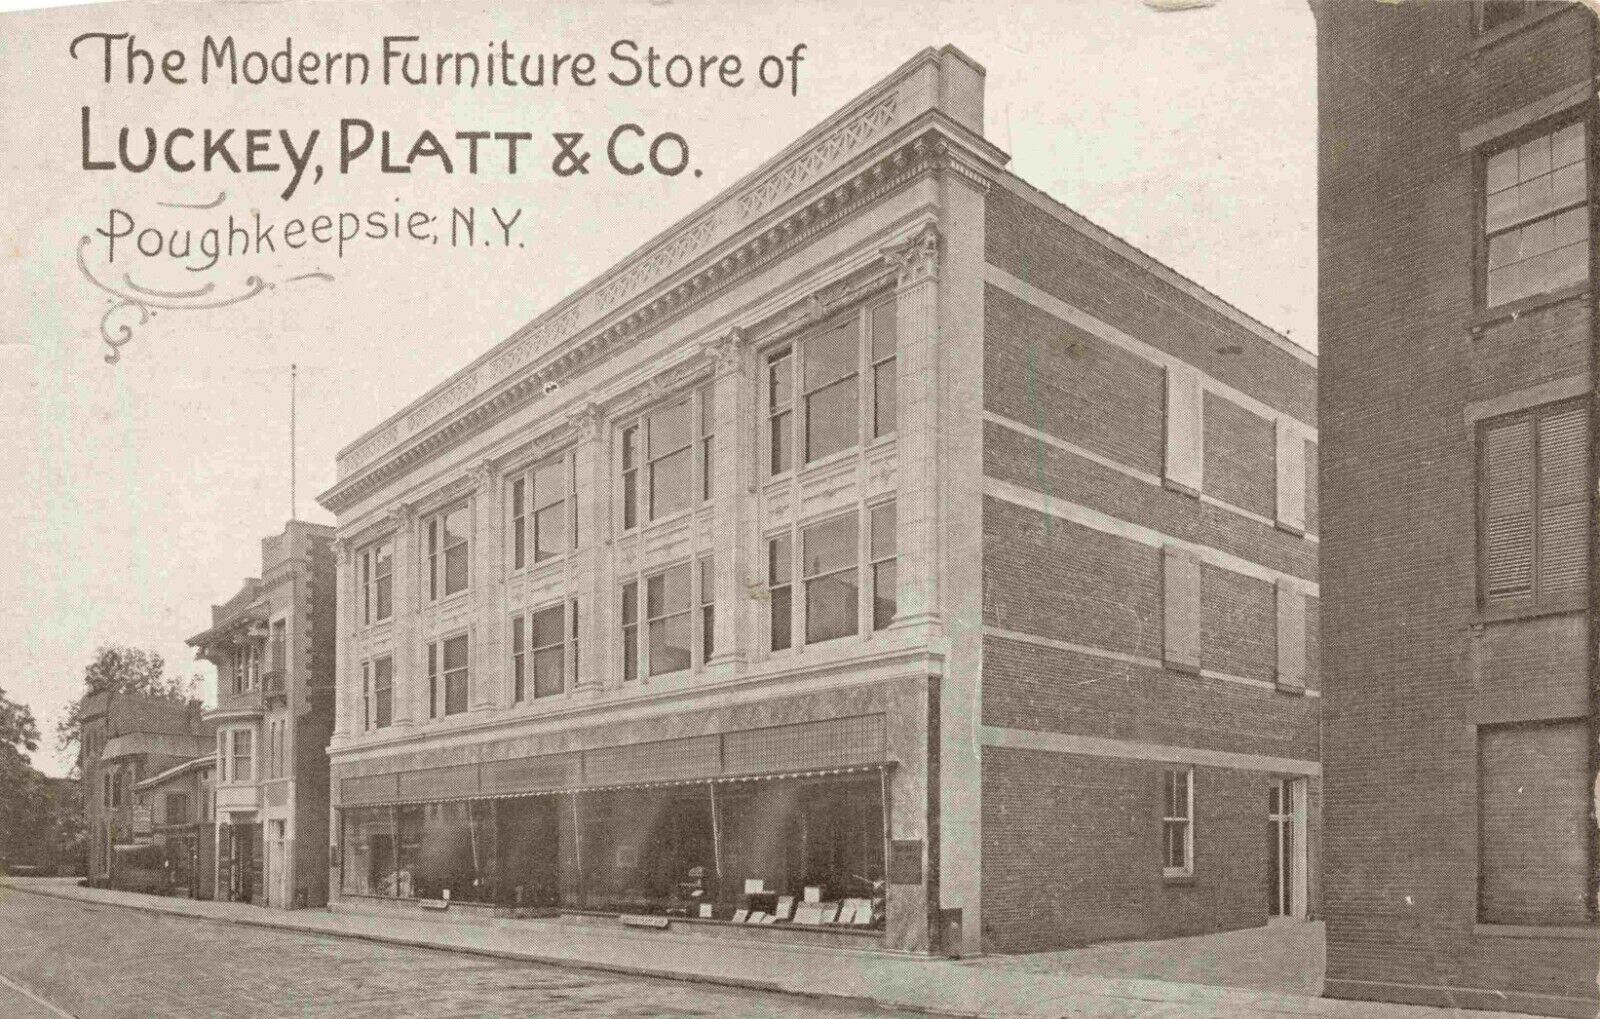 A View Of The Modern Furniture Store Of Luckey, Platt & Co, Poughkeepsie NY